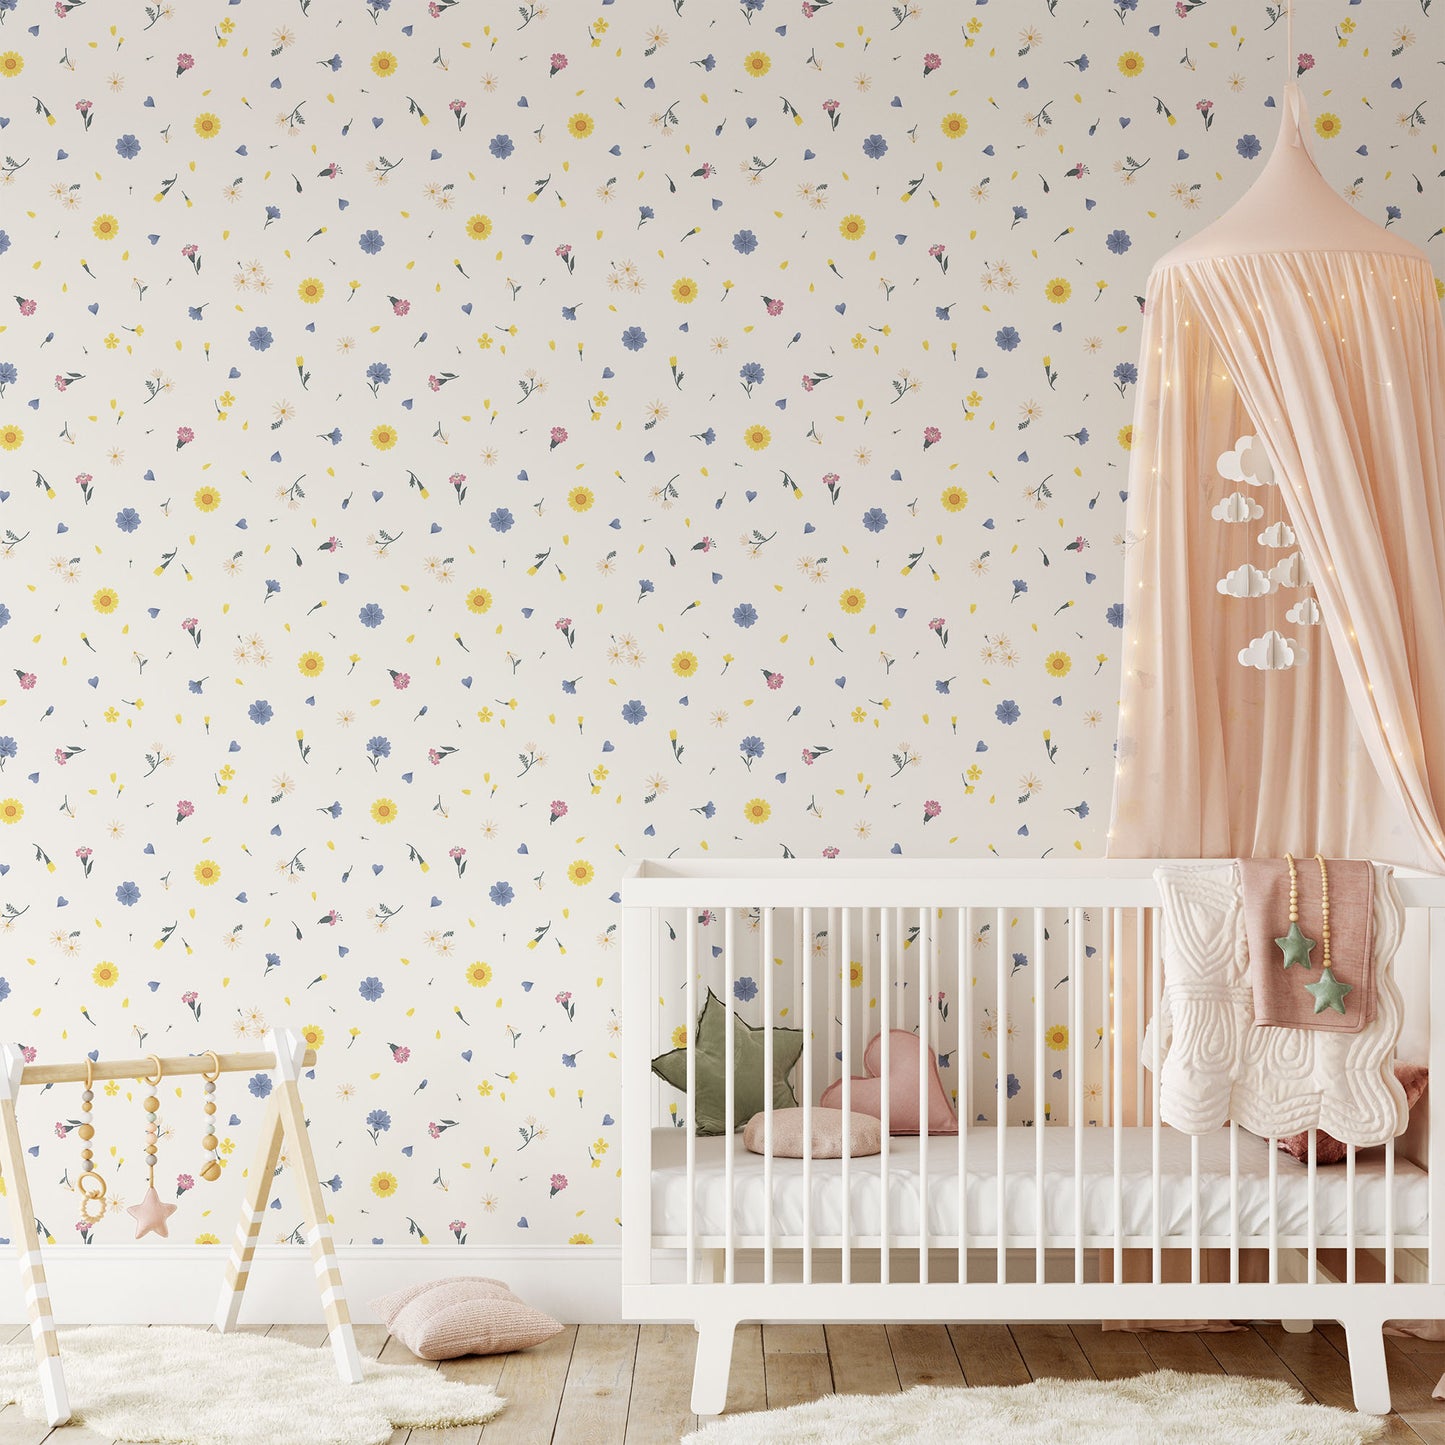 Whimsical yellow, blue and pink floral pattern on cream background easy to install and remove peel and stick custom wallpaper available in different lengths/sizes locally created and printed in Canada wallpaper. Washable, durable, commercial grade, removable and waterproof.